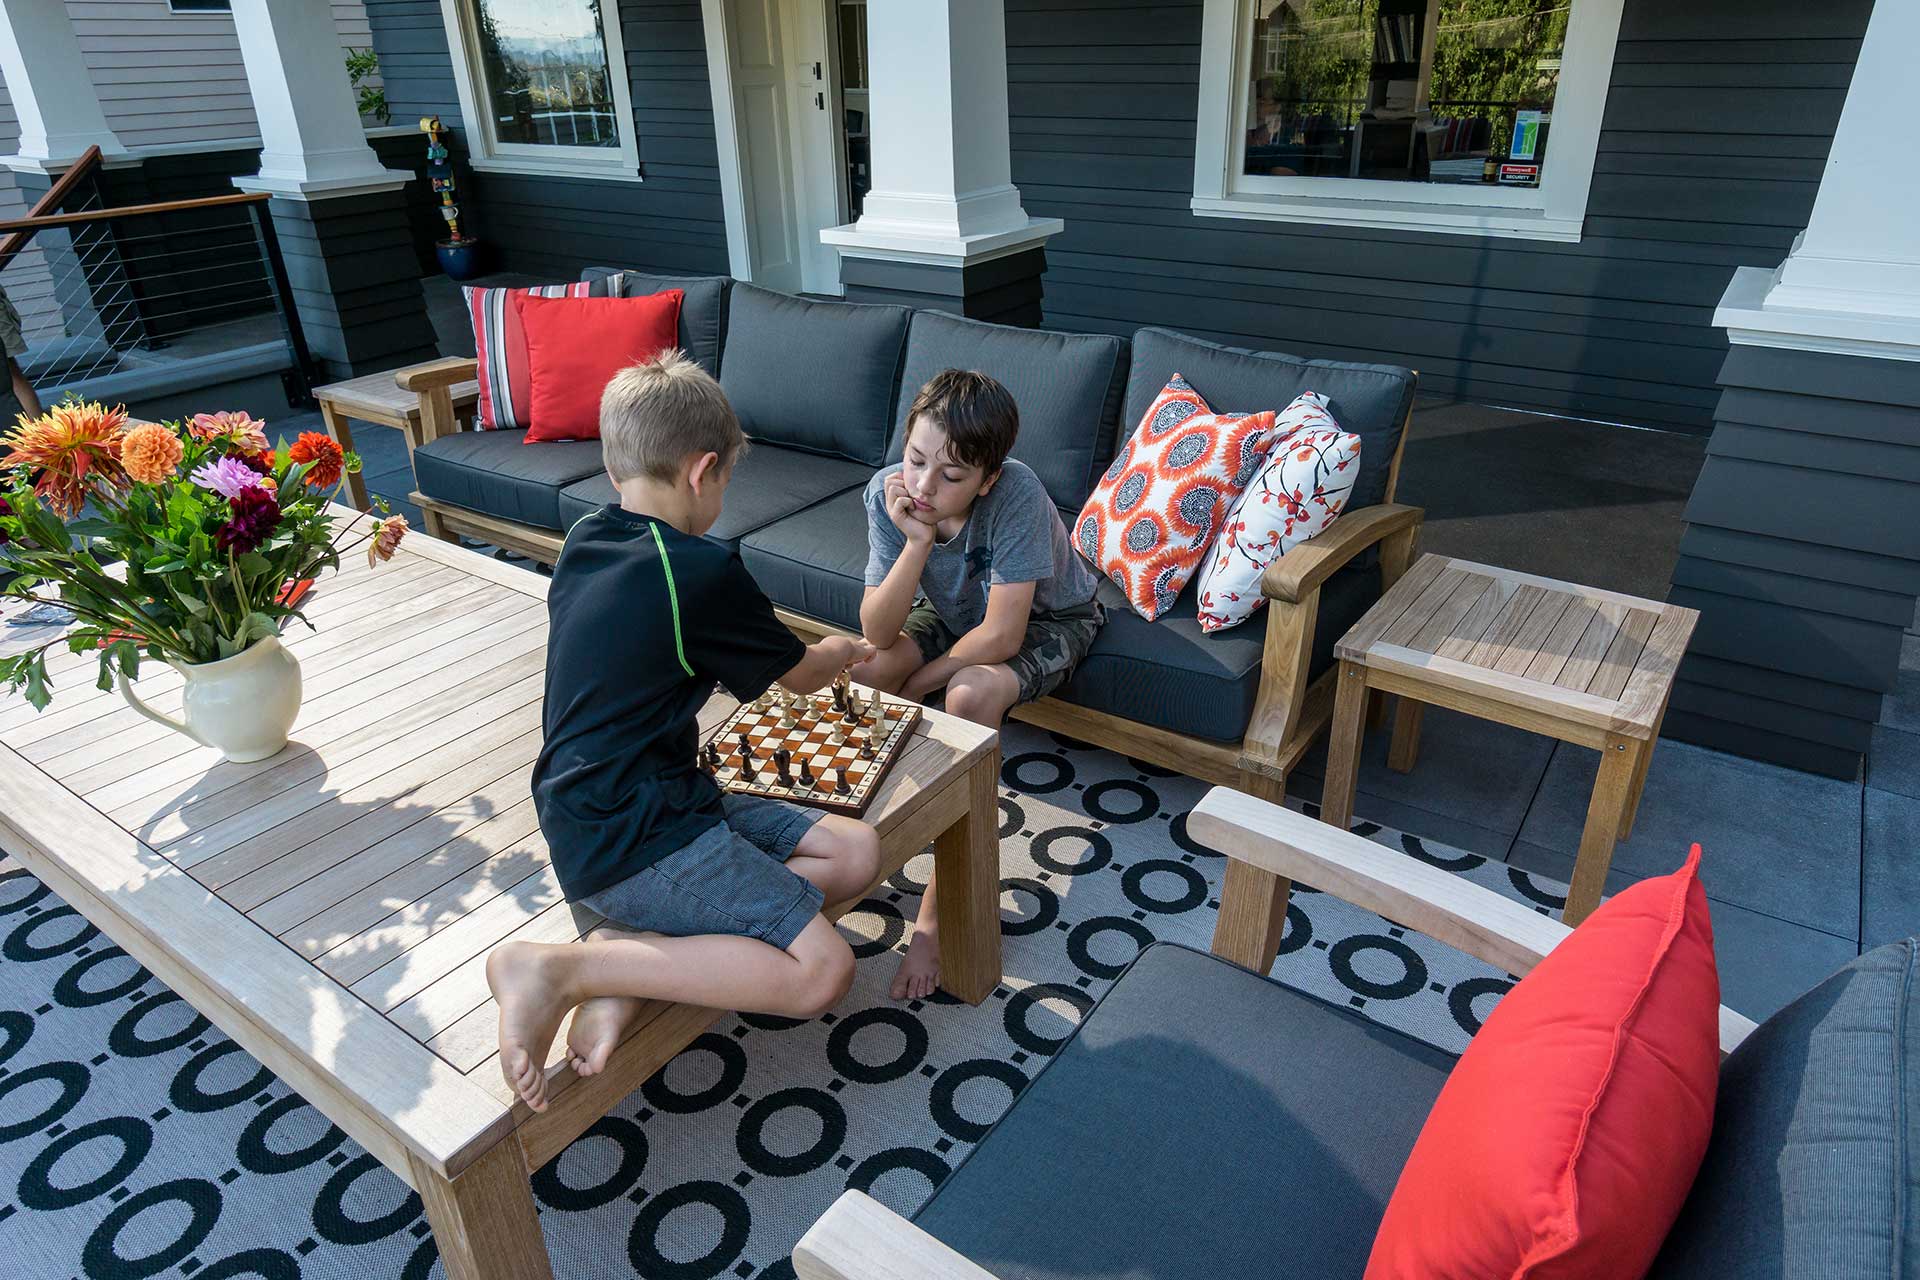 The new rooftop deck at the Family Porch provides a space to gather and socialize.